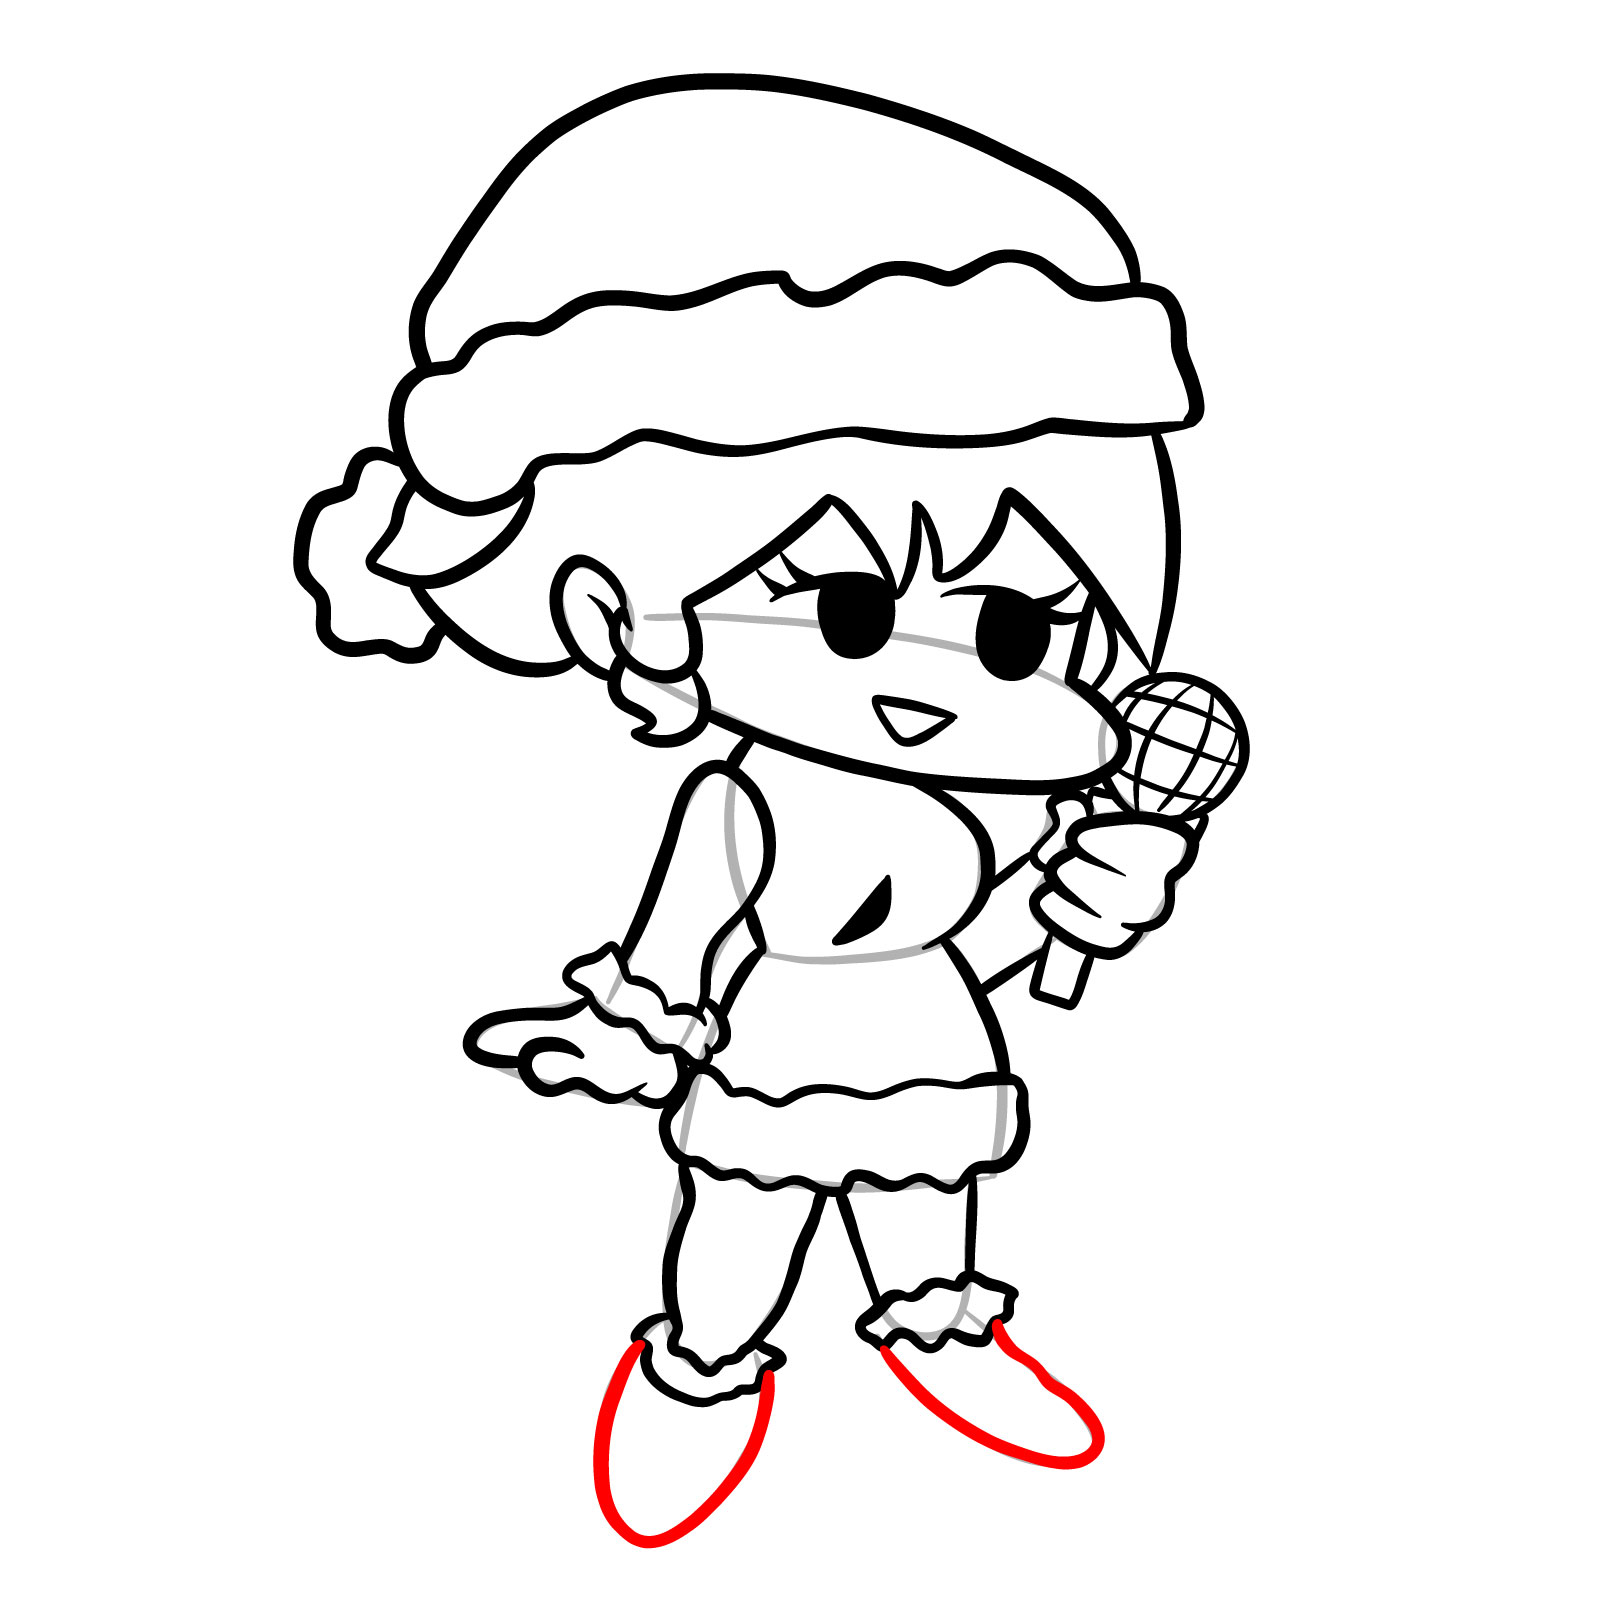 How to draw standing Santa GF - step 25